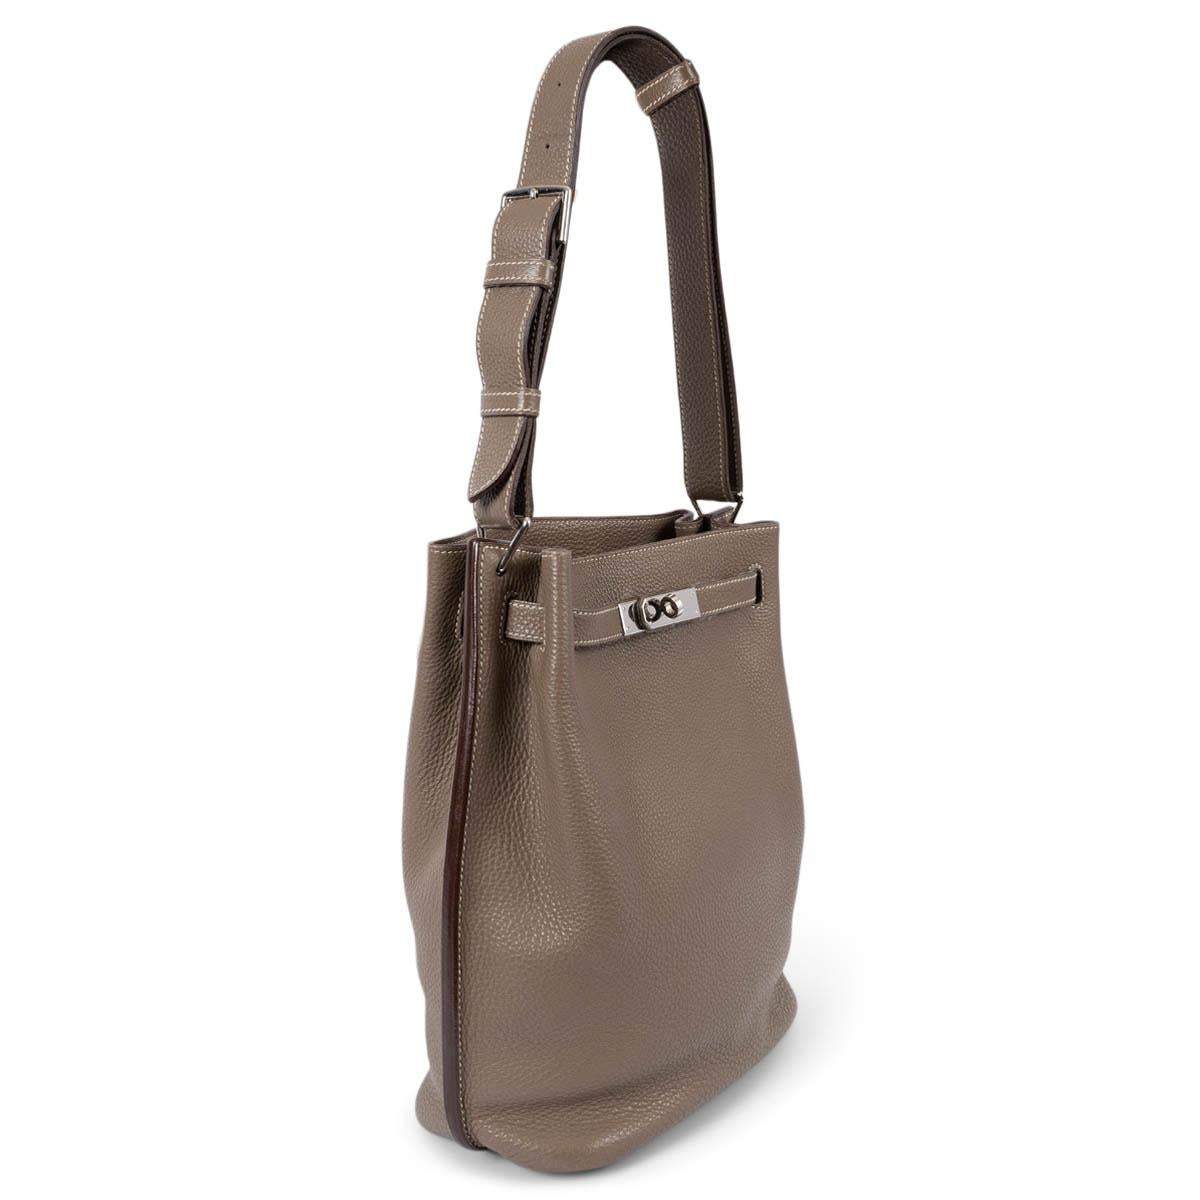 100% authentic Hermès So Kelly 22 shoulder bag in Etoupe (taupe) Taurillon Clemence leather with contrasting white stitching. Lined in Chèvre (goatskin) with a zipper pocket against the front and an open pocket against the back. Has been carried and